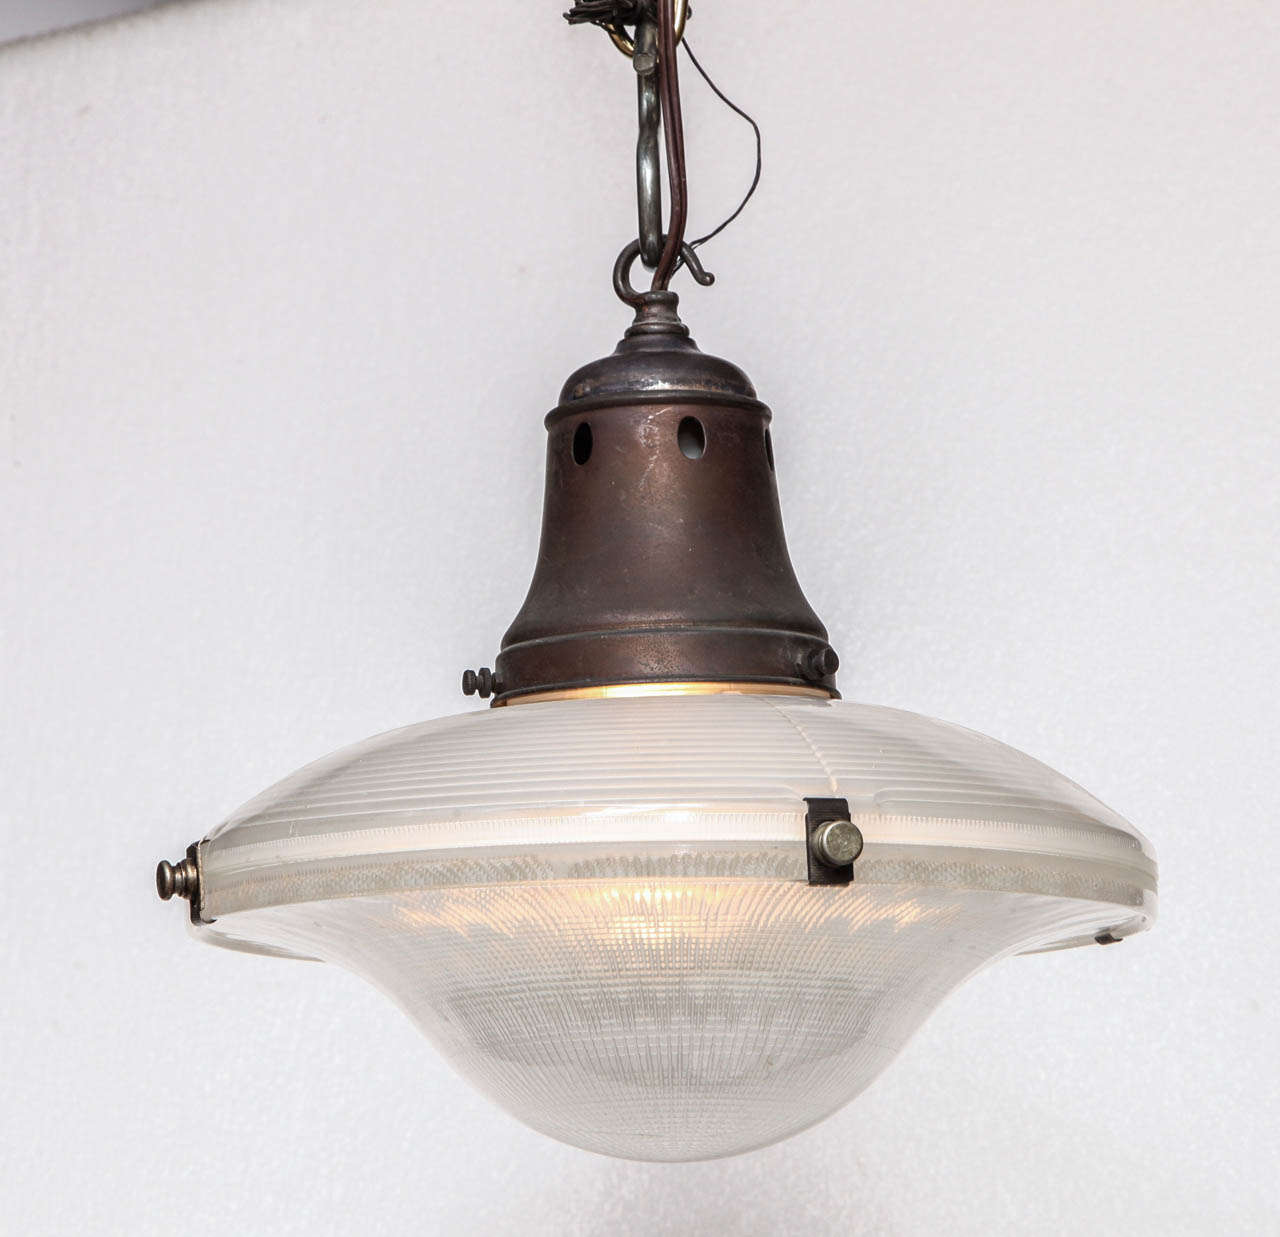 UK, circa 1890

The fitter and hardware on this fixture can be re-plated in any finish the client desires.